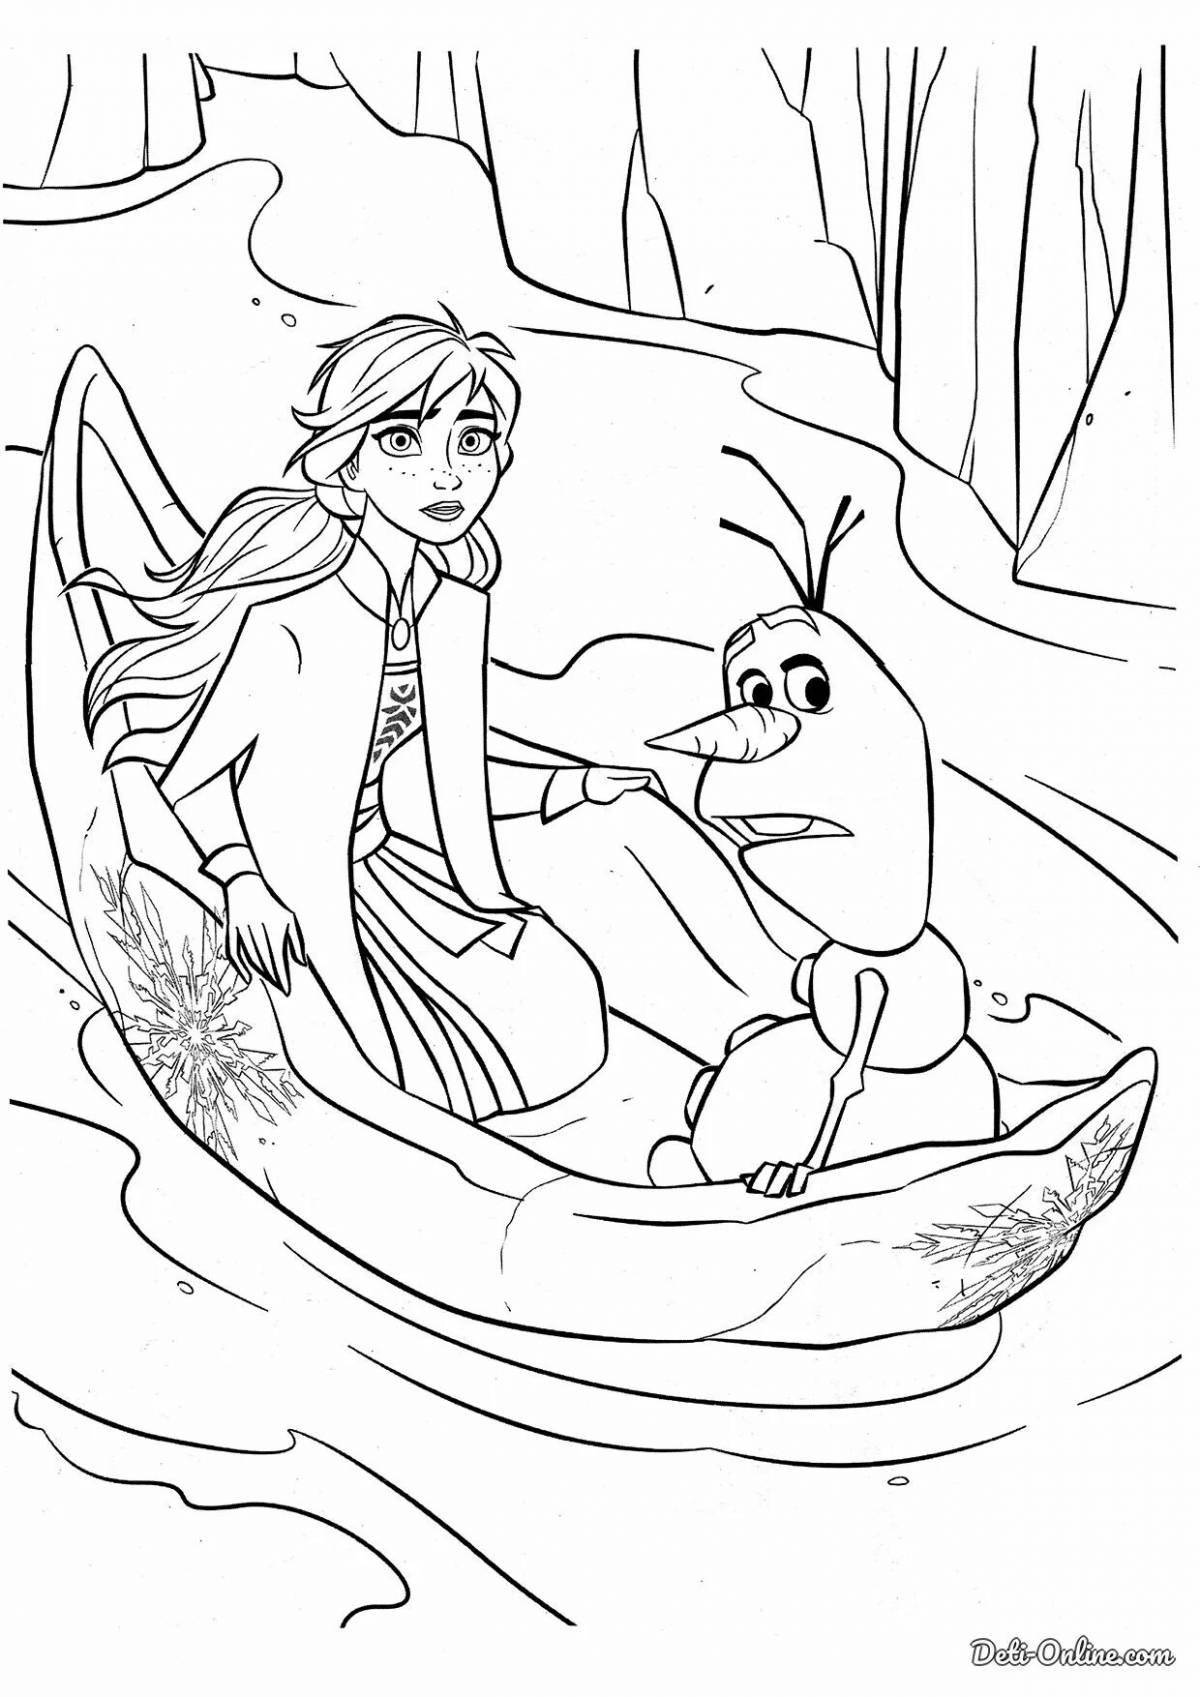 Charming anna and olaf coloring